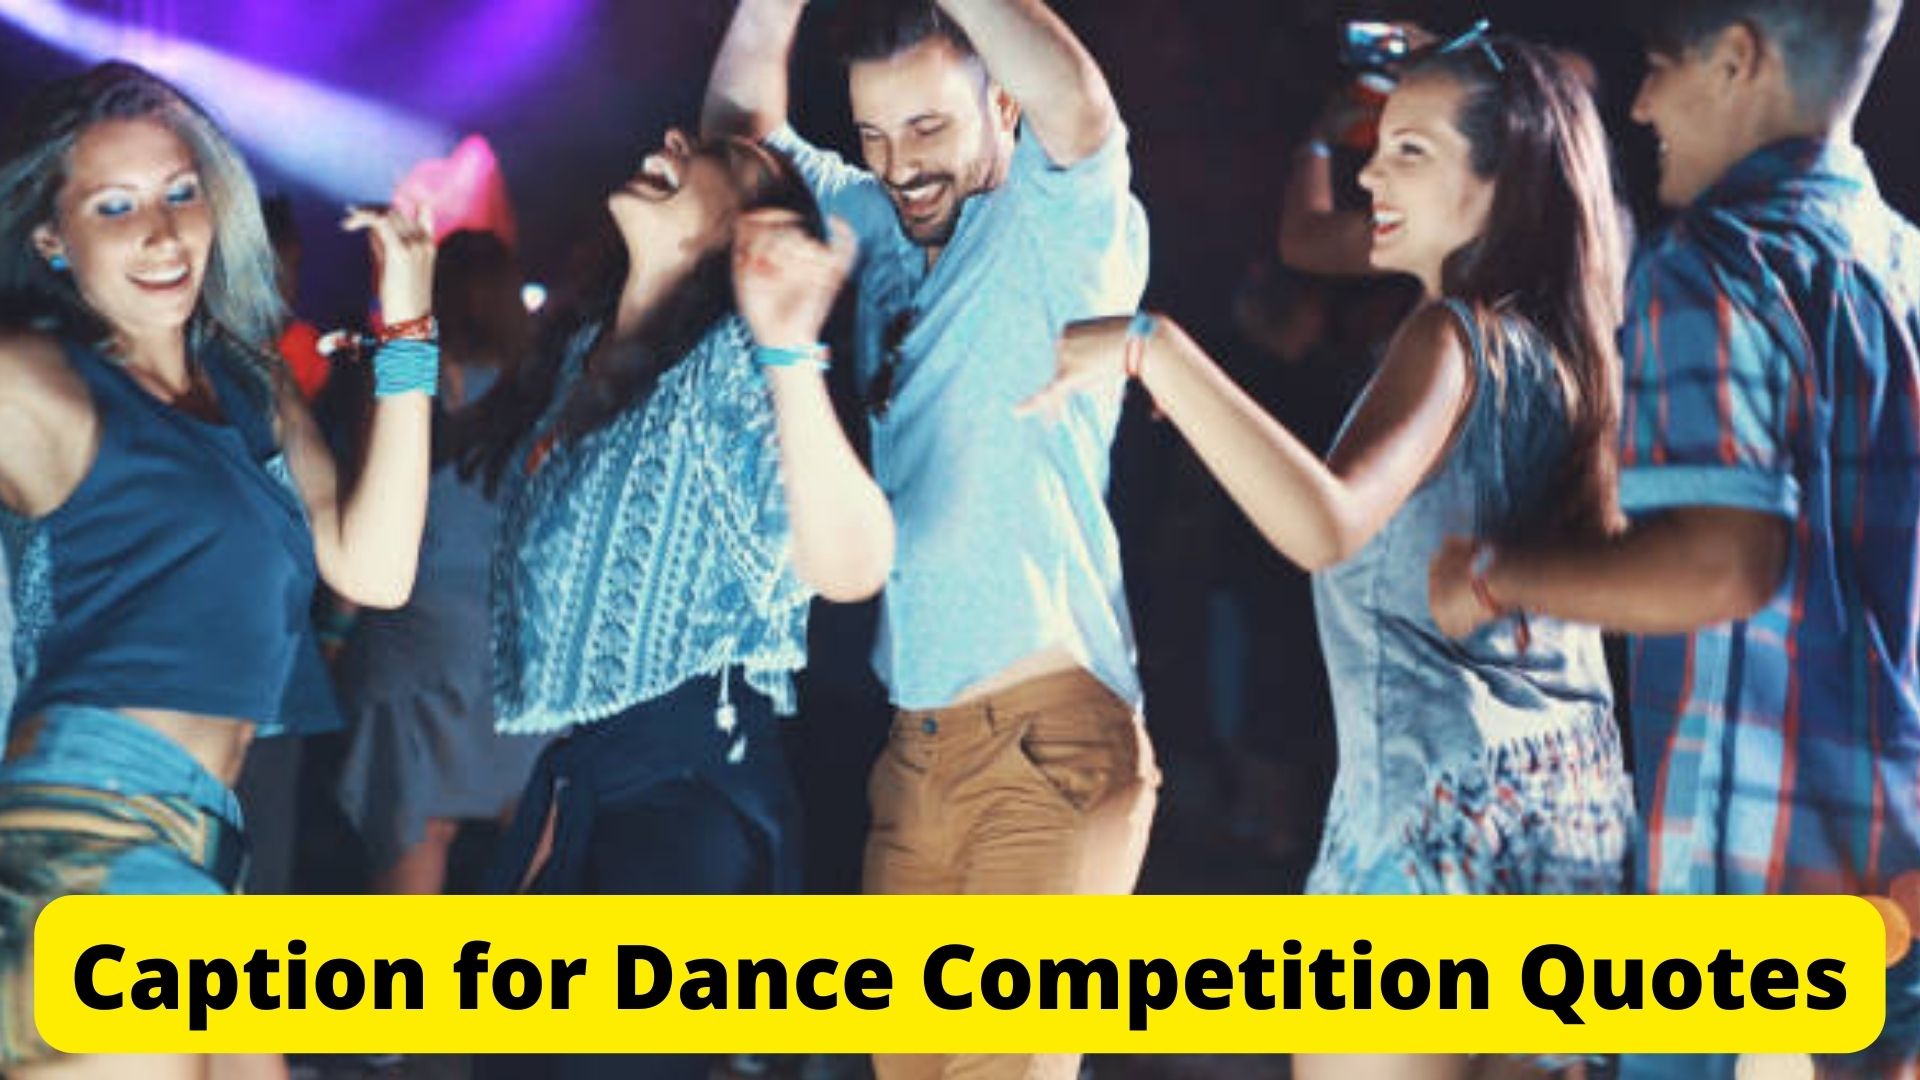 Caption for Dance Competition Quotes